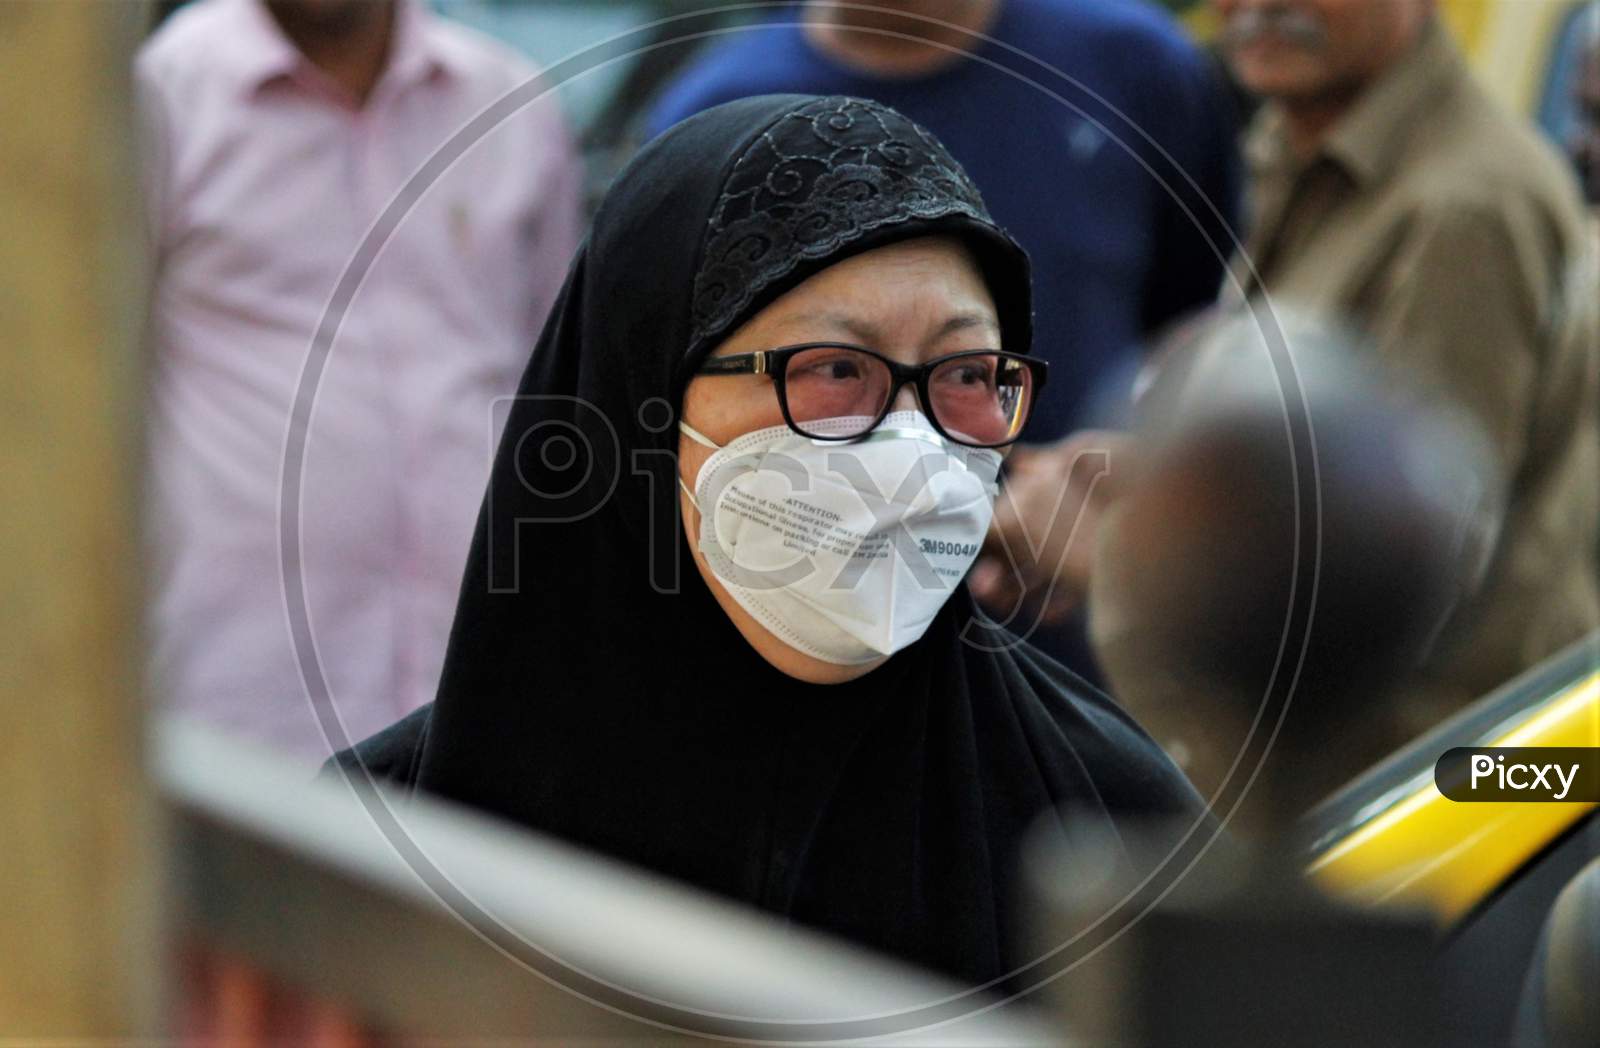 A woman wearing a protective mask is seen outside the premises of a hospital where a special ward has been set up for the coronavirus patients in Mumbai, India on March 5, 2020.